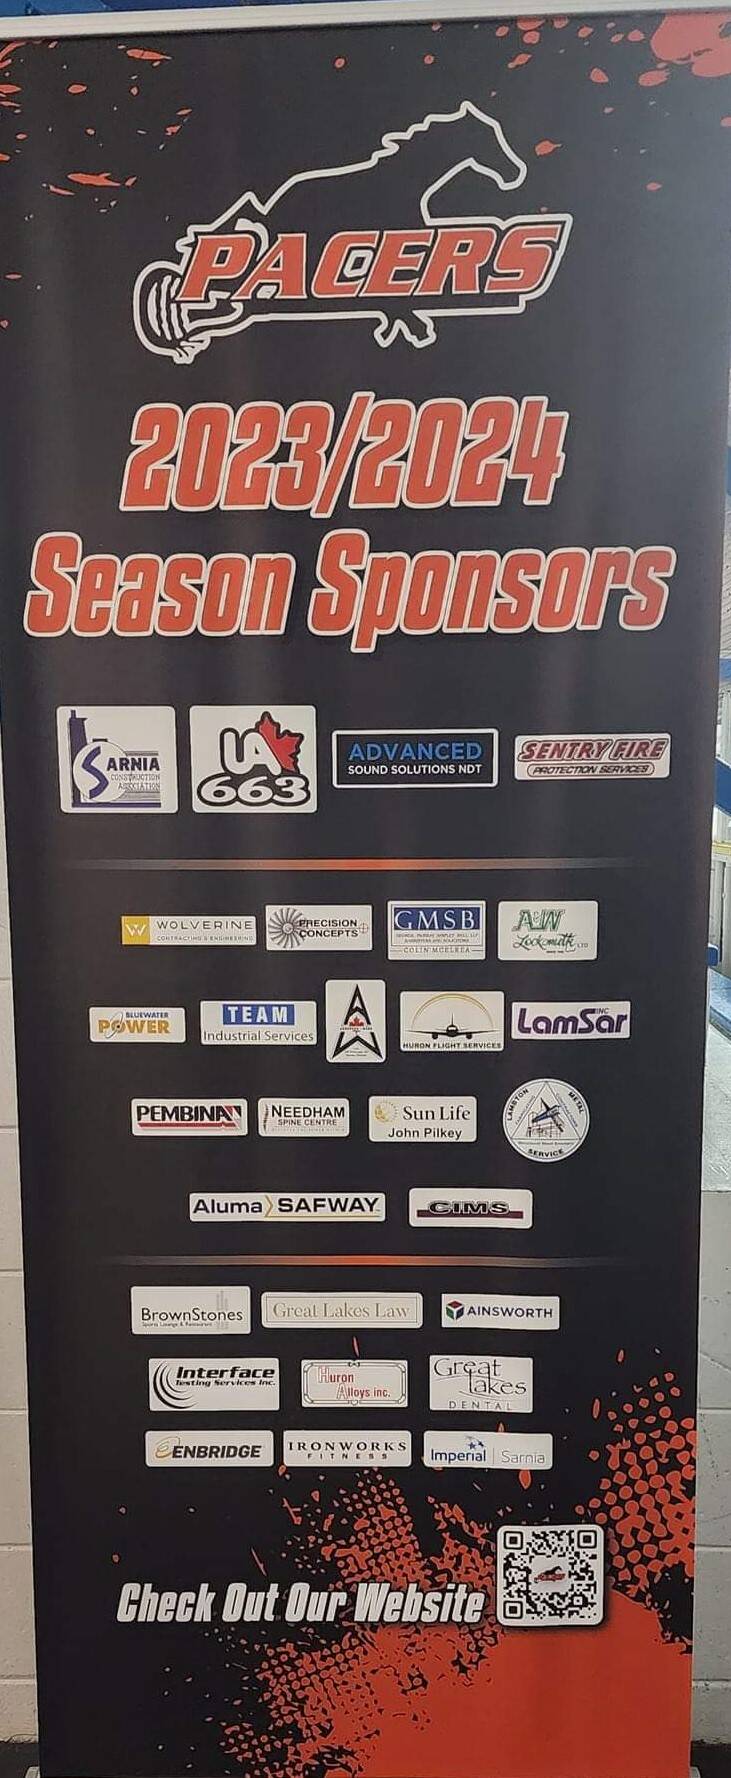 OUR SPONSORS